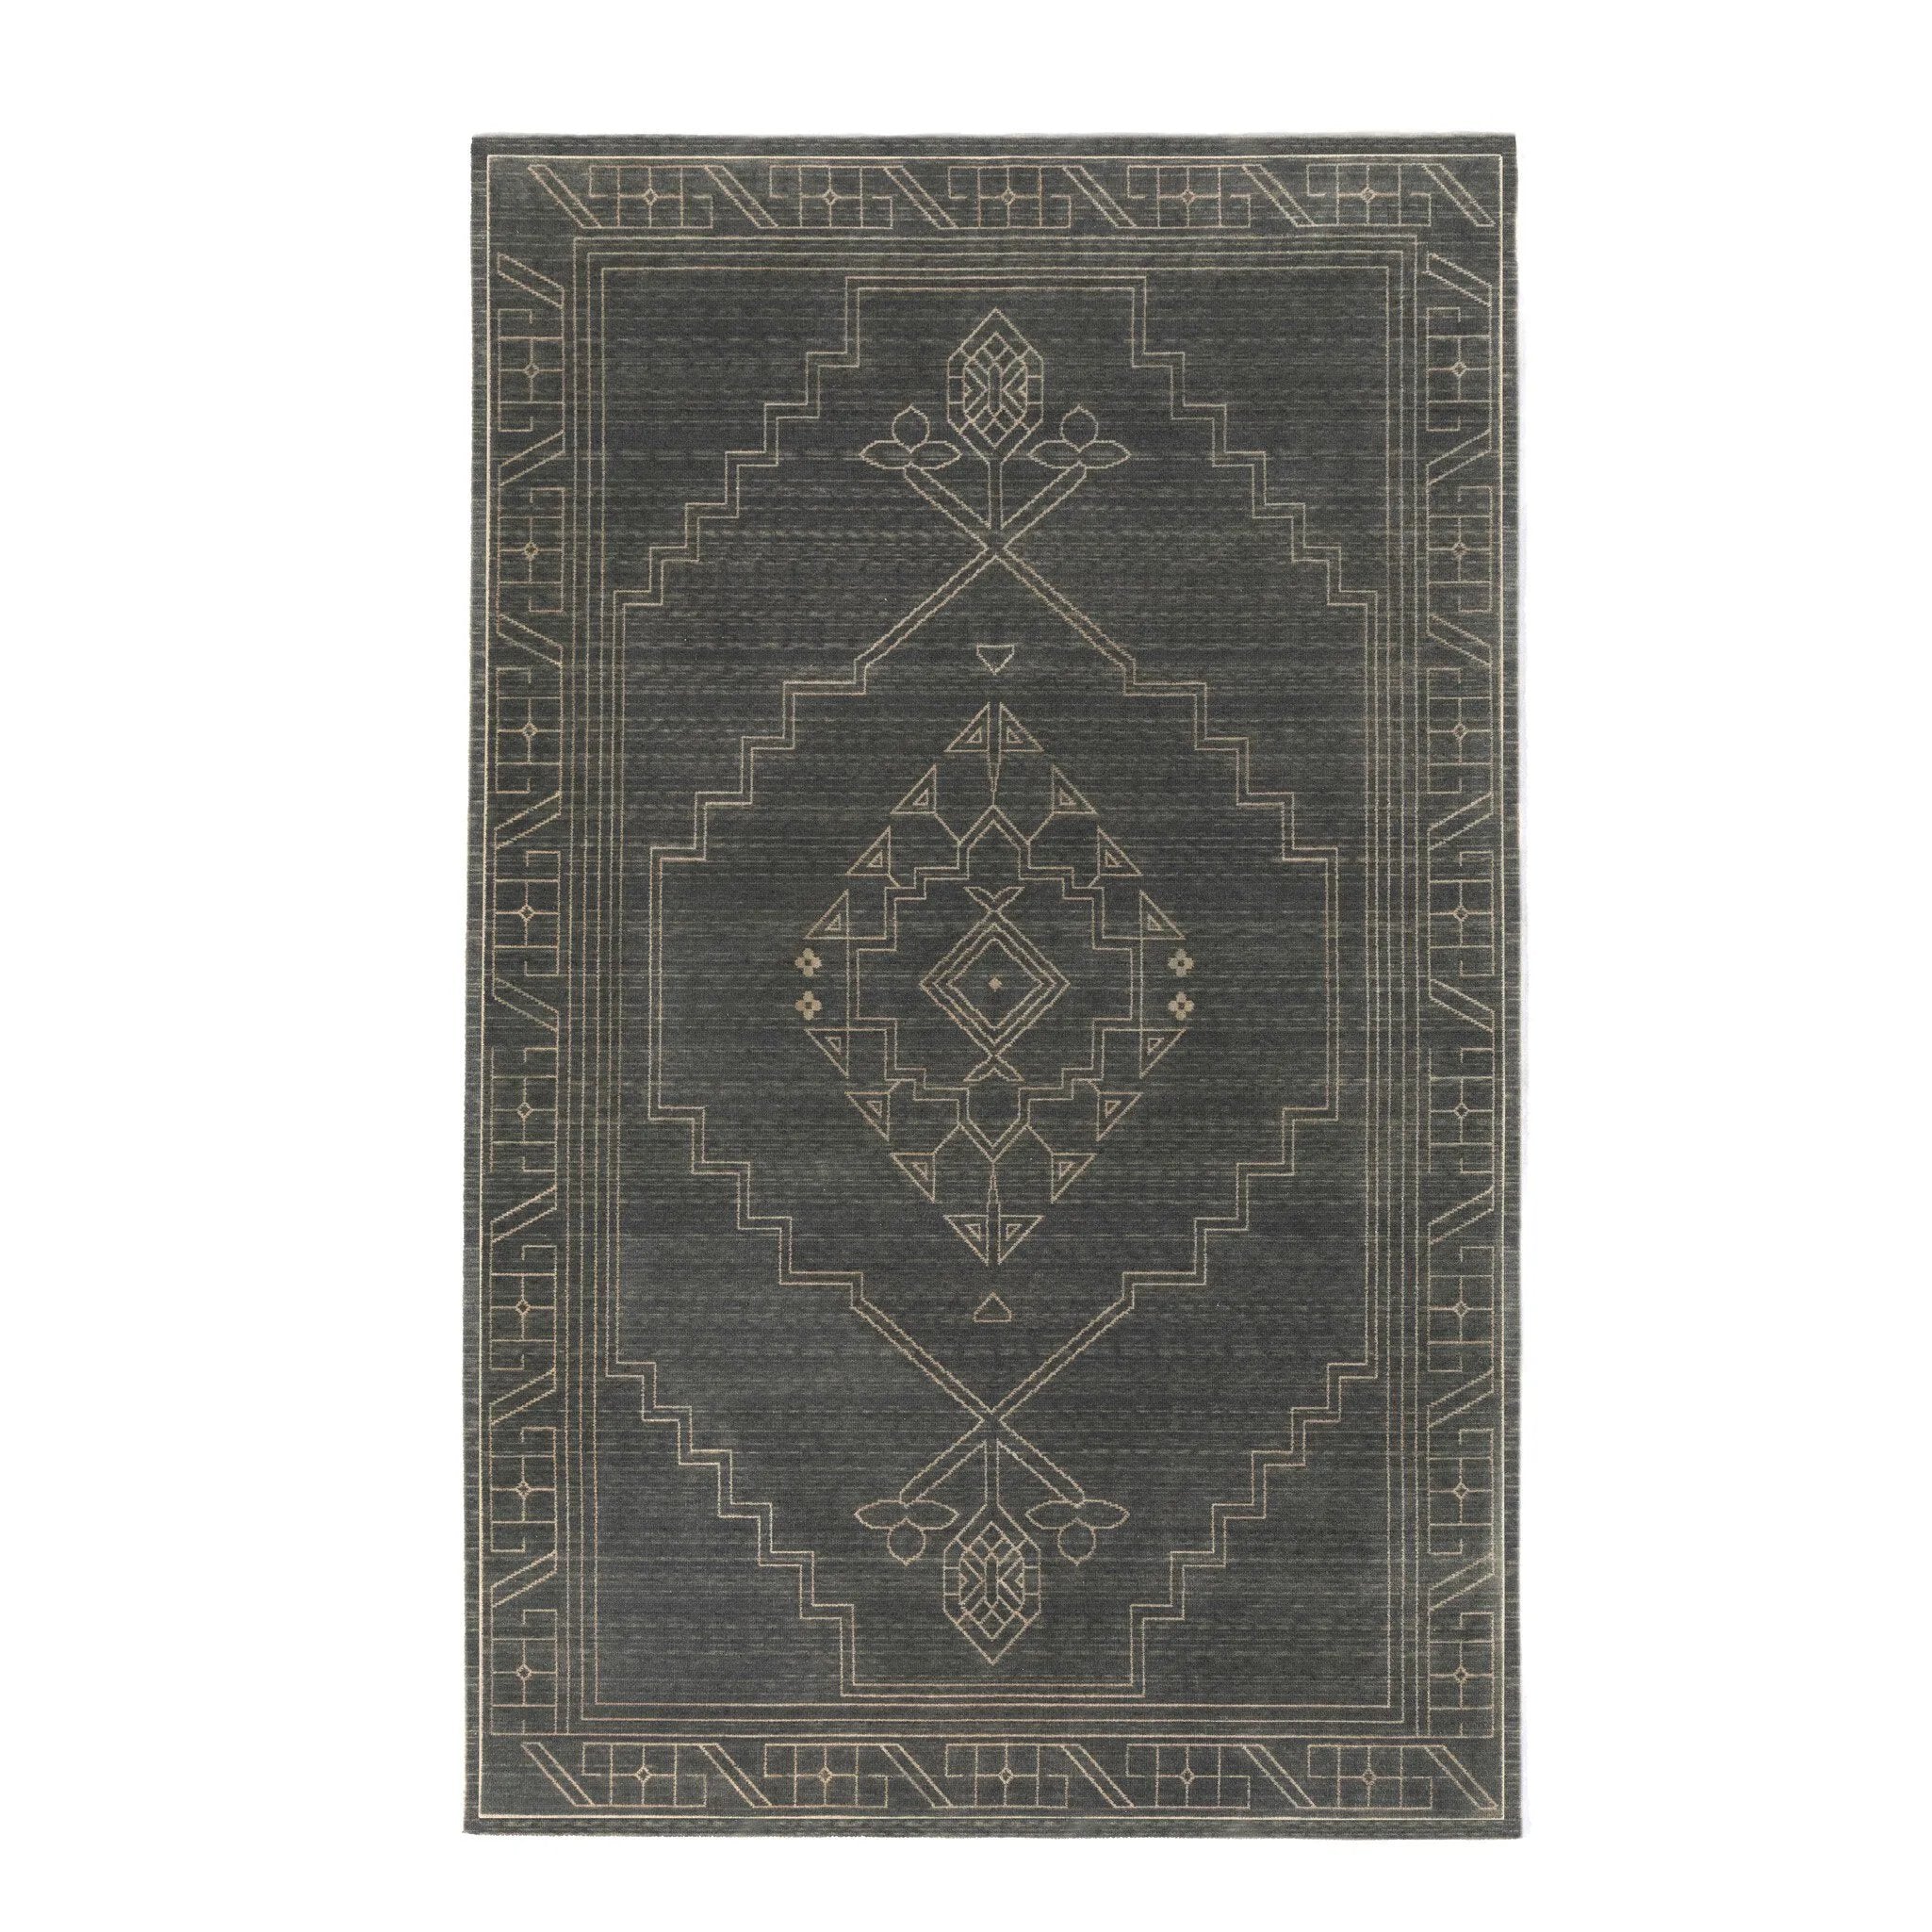 A subtle Turkish-inspired pattern adorns this wool-blend rug. The pattern and ground are purposefully similar in color for a unique take on a neutral.Overall Dimensions108.00"w x 144.00"d x 0.50"hFull Details &amp; SpecificationsTear SheetCleaning Code : X (vacuum Or Light Brush, No Cleaning Products Amethyst Home provides interior design, new home construction design consulting, vintage area rugs, and lighting in the Des Moines metro area.